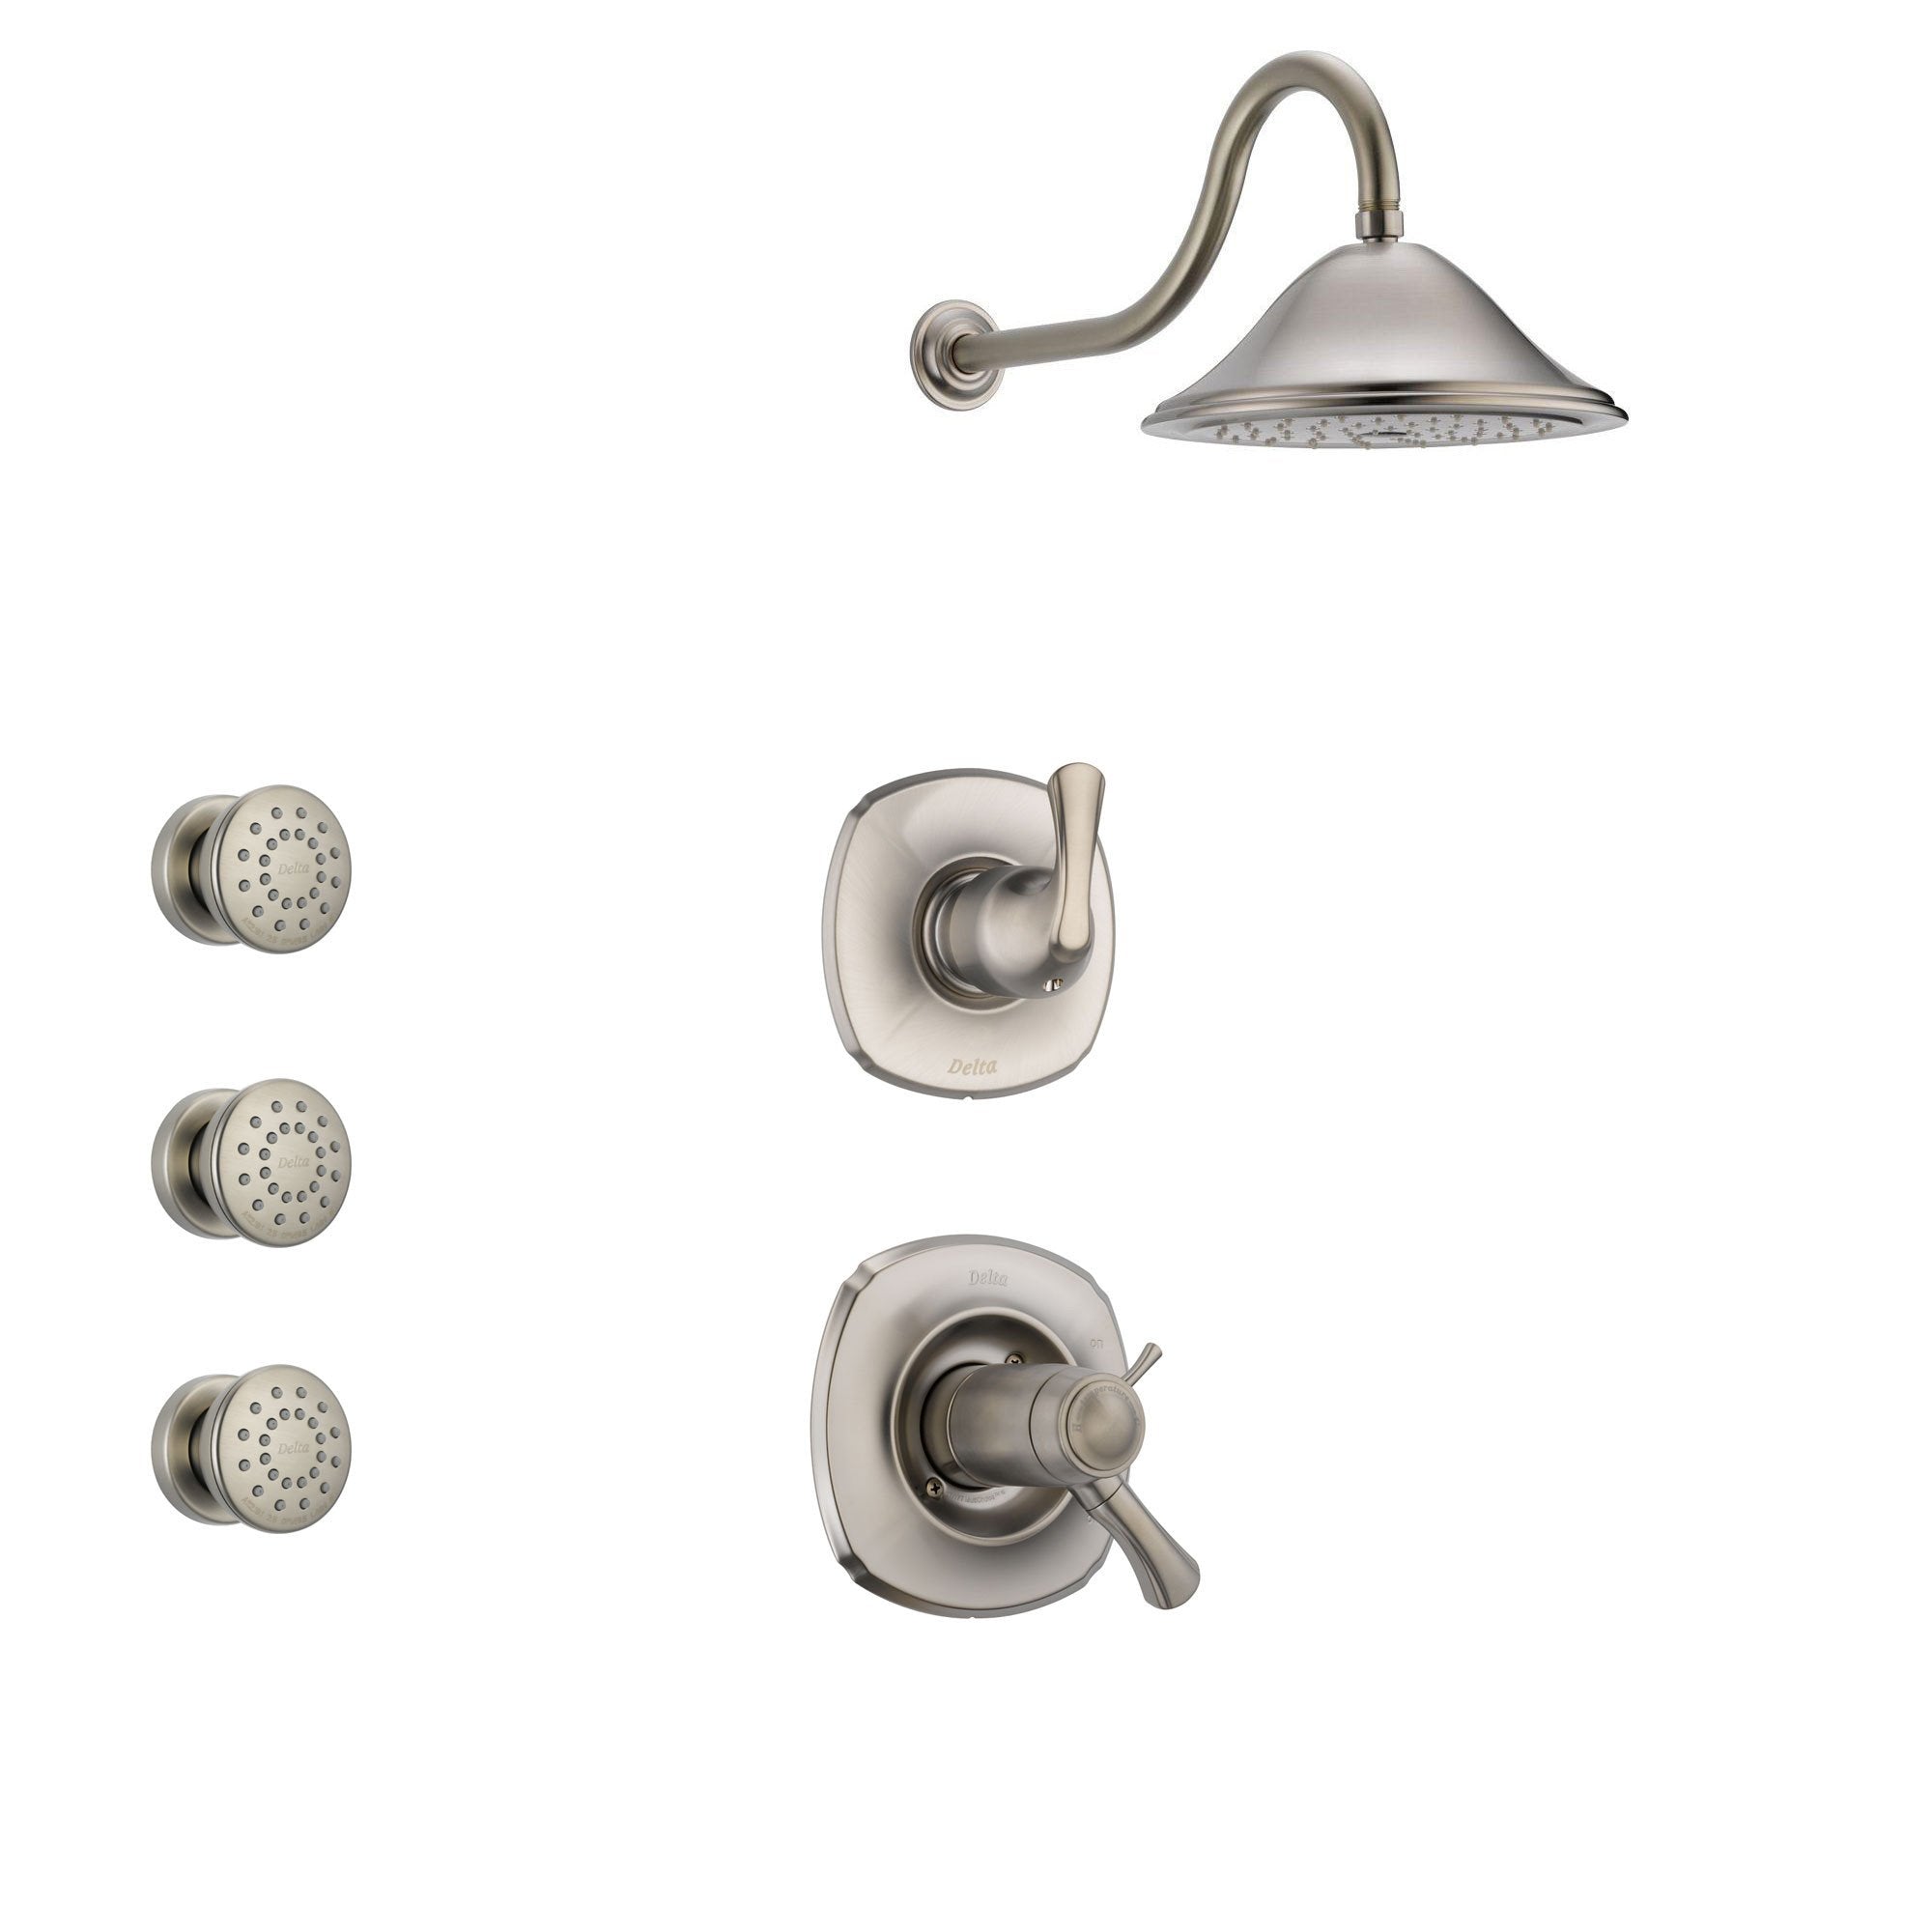 Delta Addison Stainless Steel Shower System with Thermostatic Shower Handle, 3-setting Diverter, Large Rain Showerhead, and 3 Body Sprays SS17T9282SS